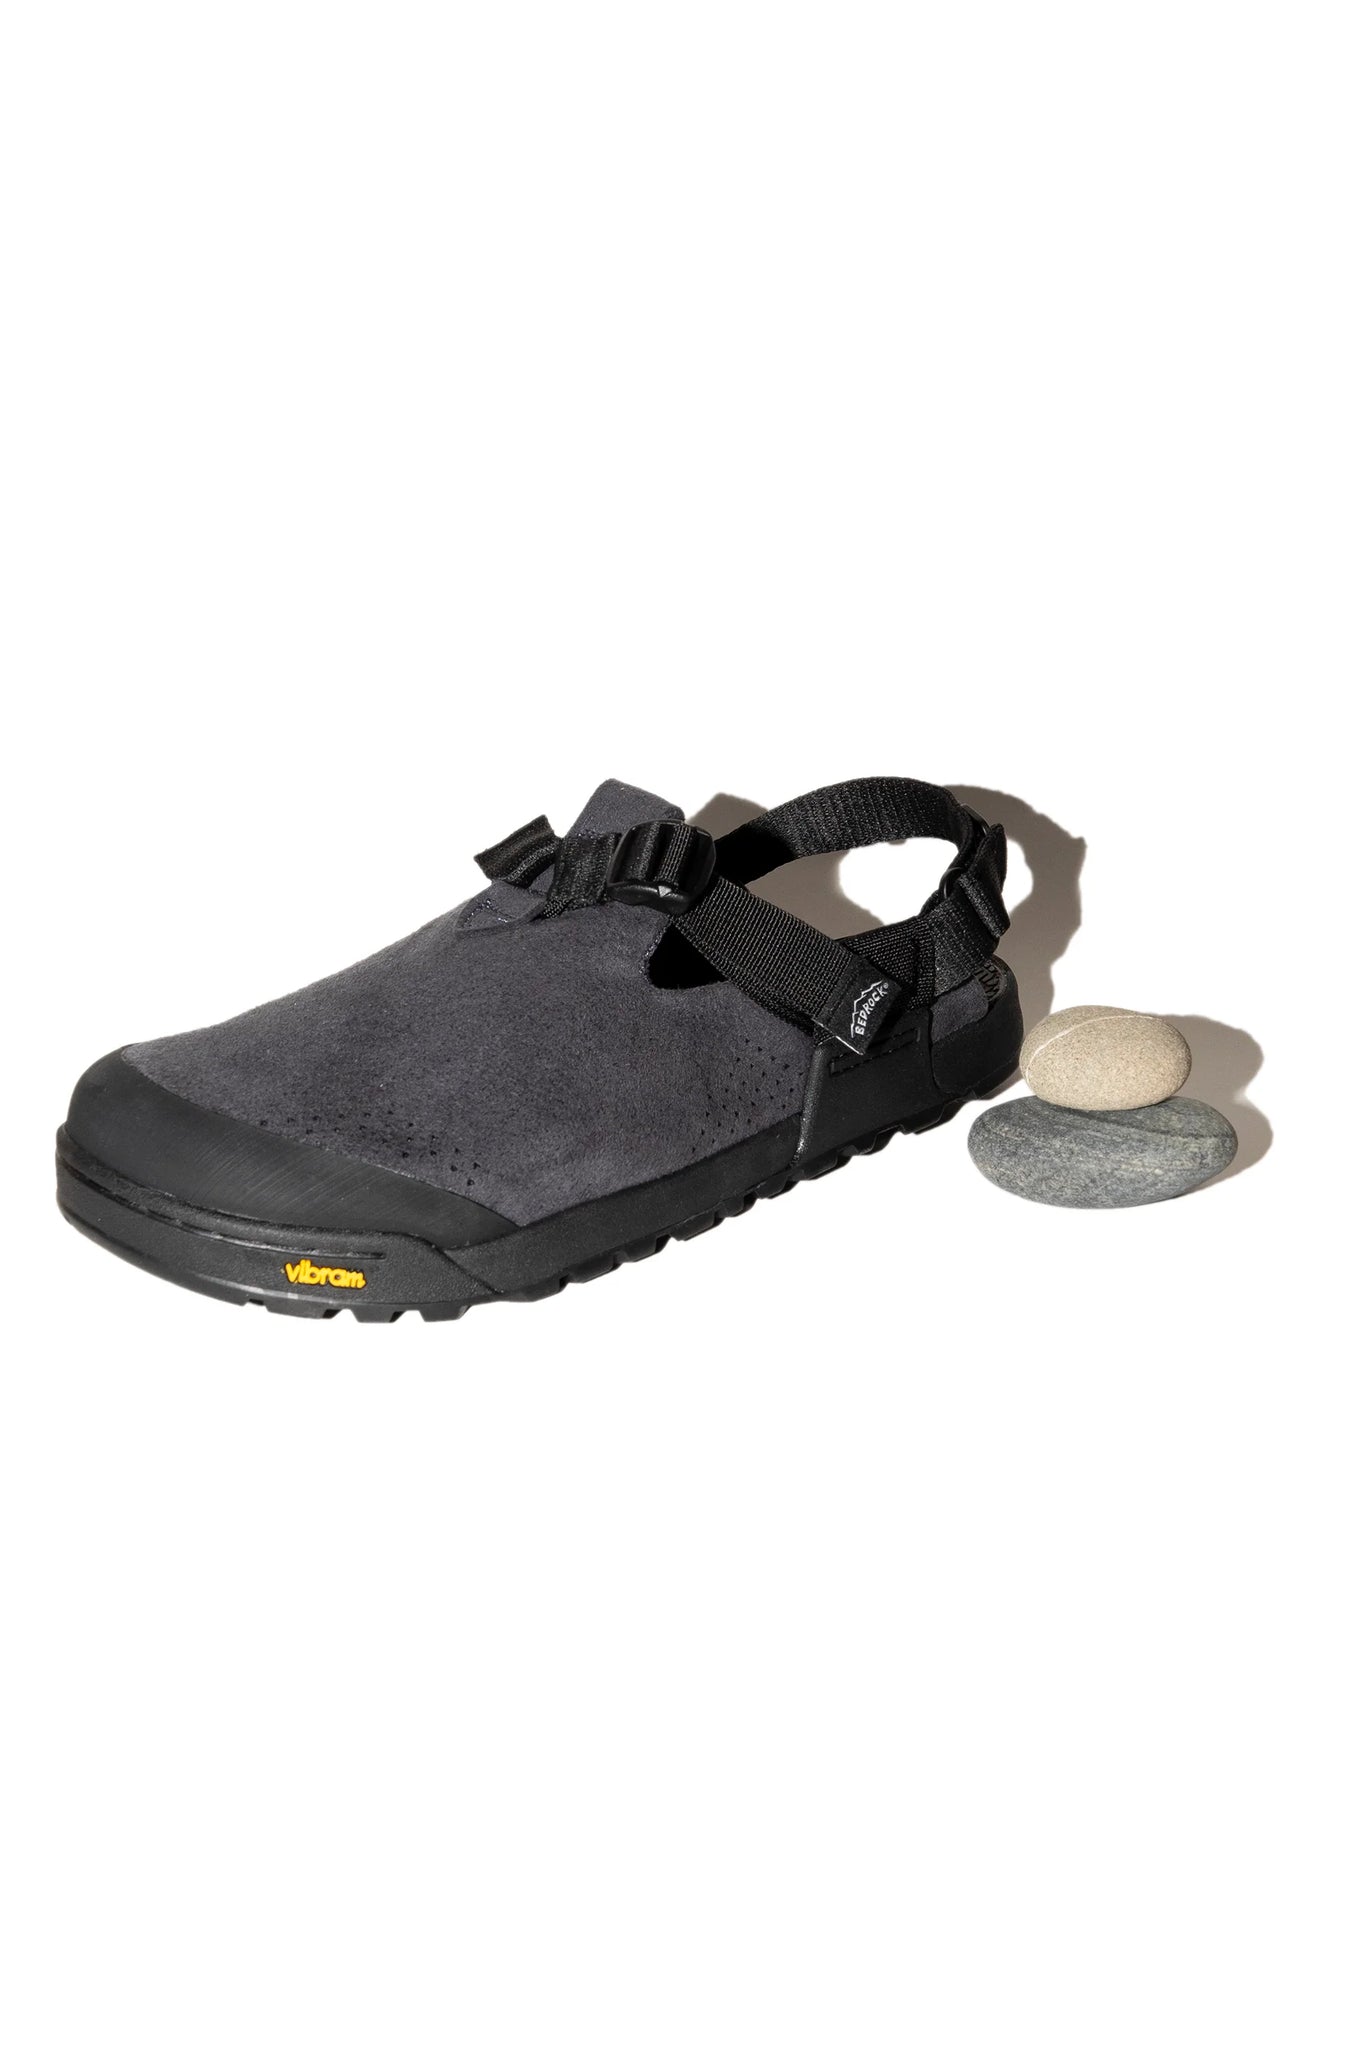 BEDROCK SANDALS - MOUNTAIN CLOG SYNTHETIC SUEDE IN GREY